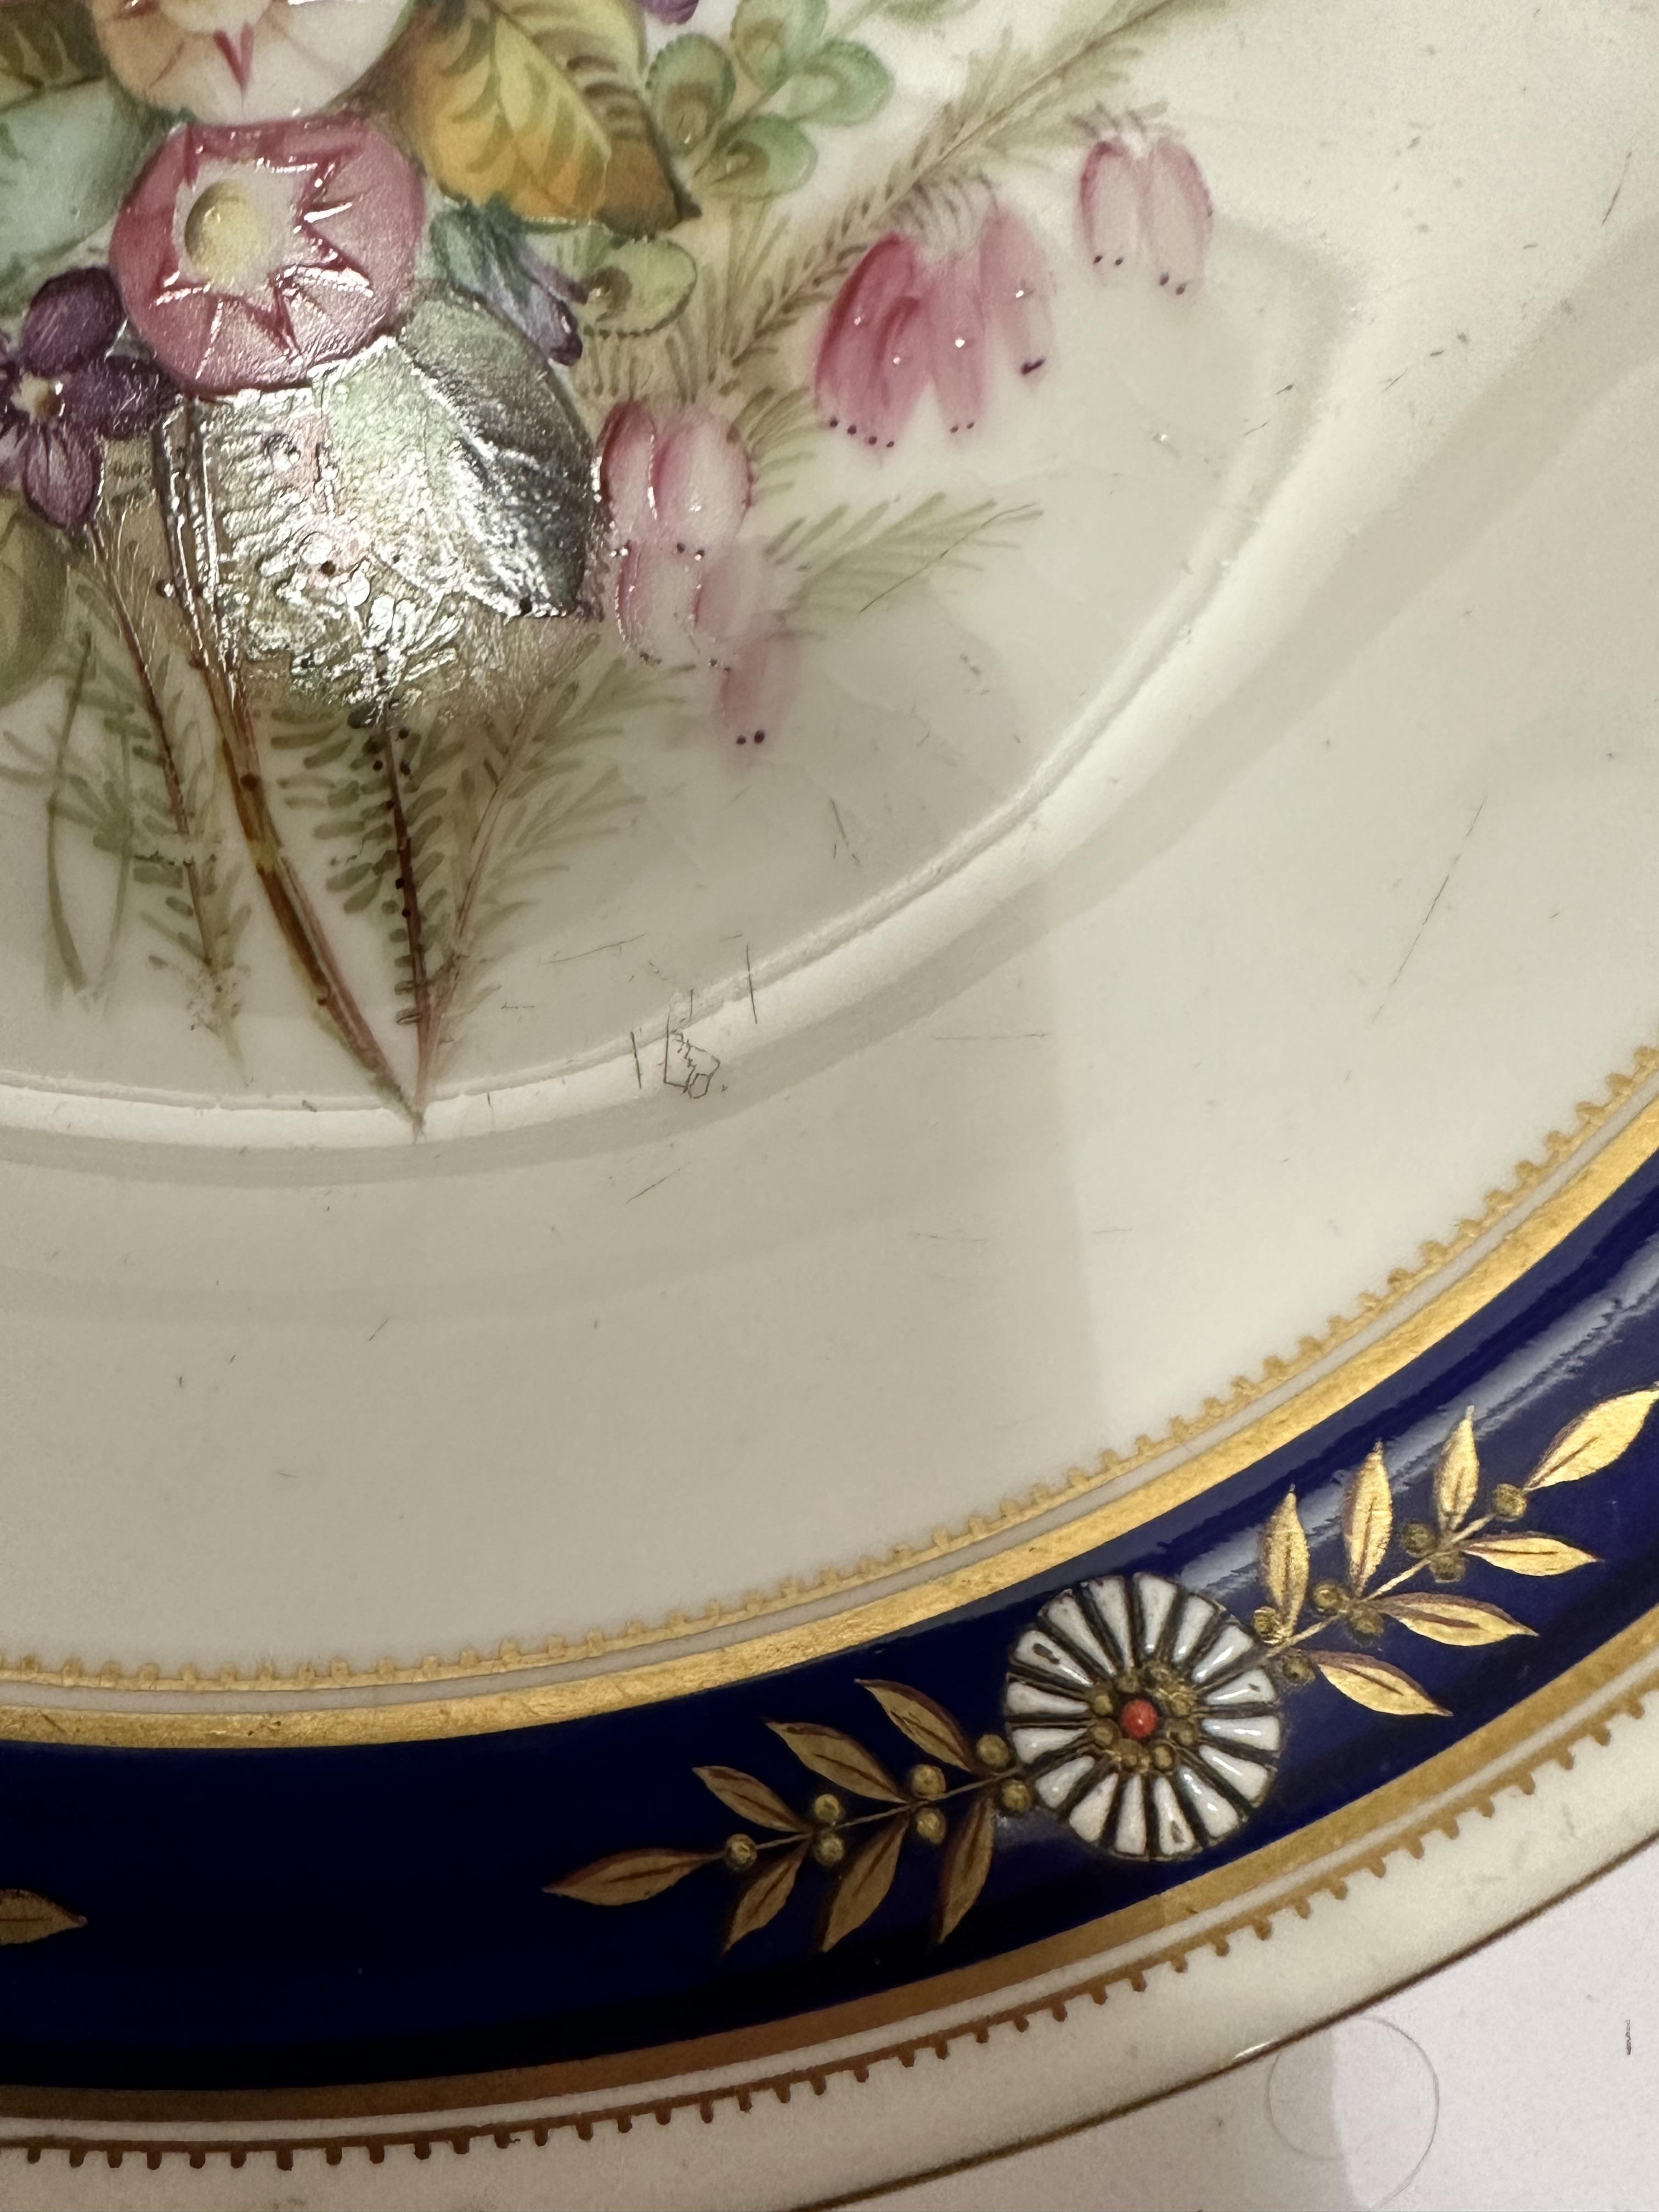 An Edwardian Royal Worcester nineteen piece dessert service including three stands, (5cm x 23cm) and - Image 25 of 29